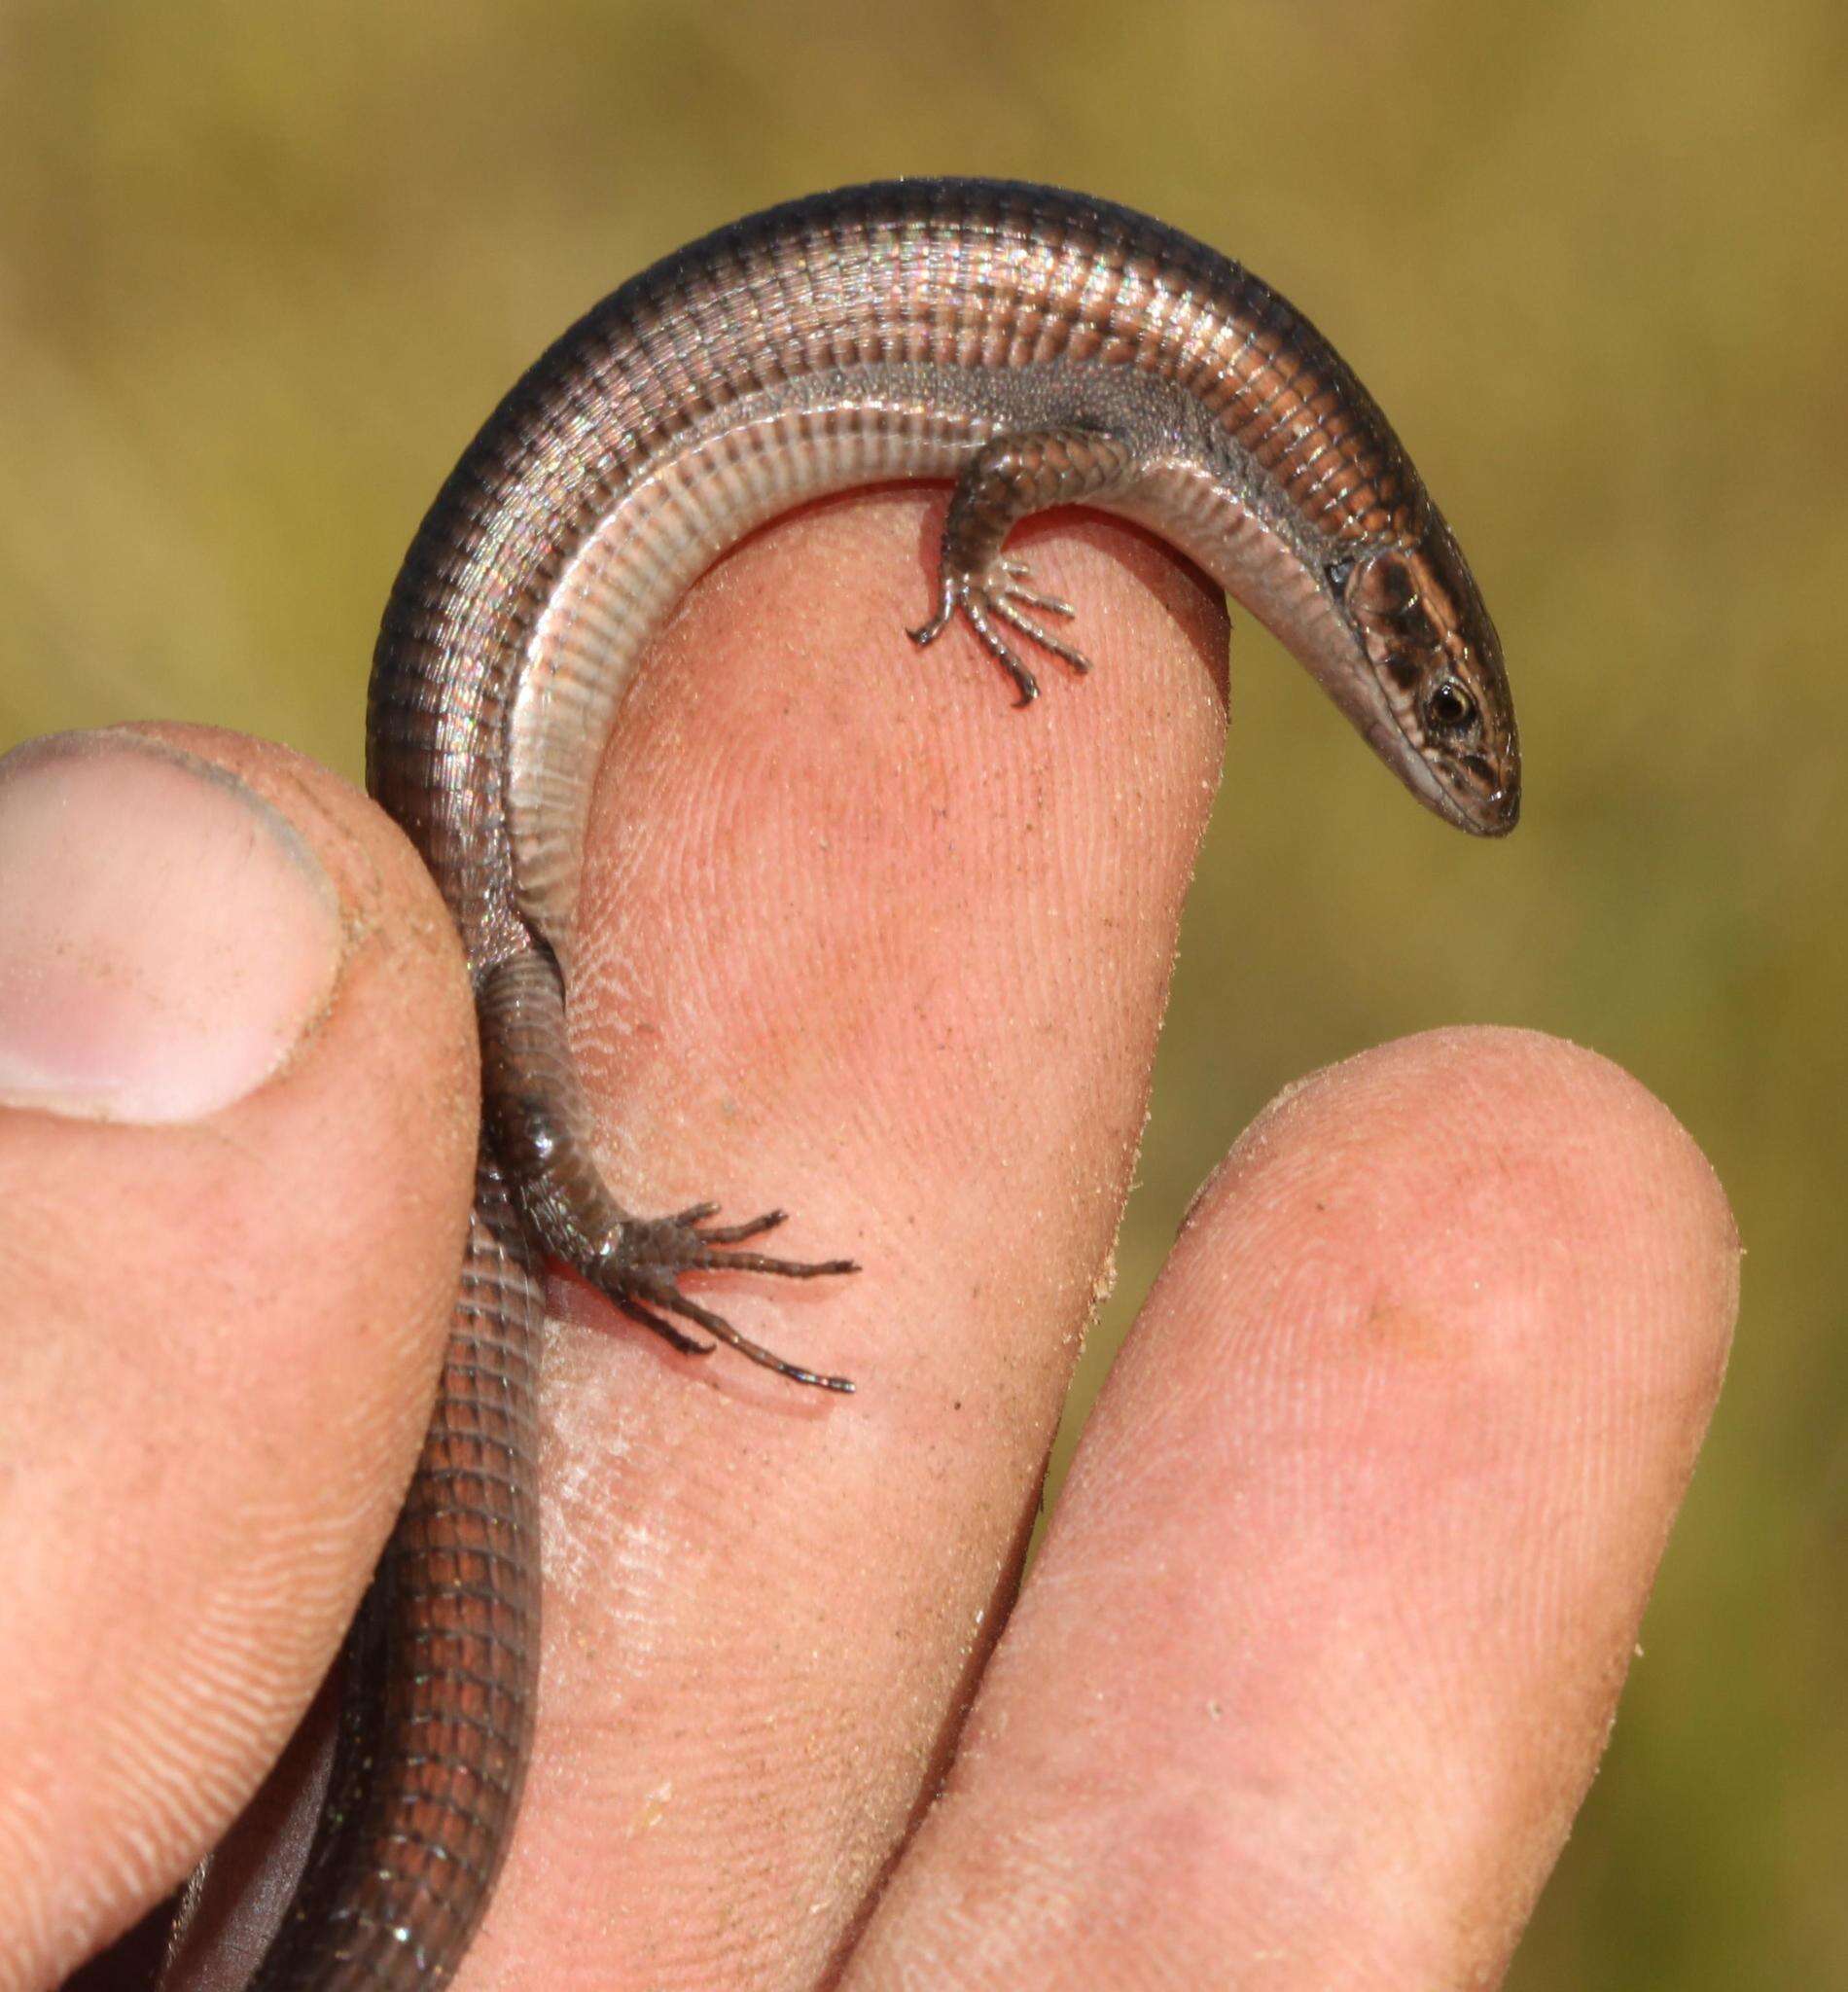 Image of Five-toed Whip Lizard